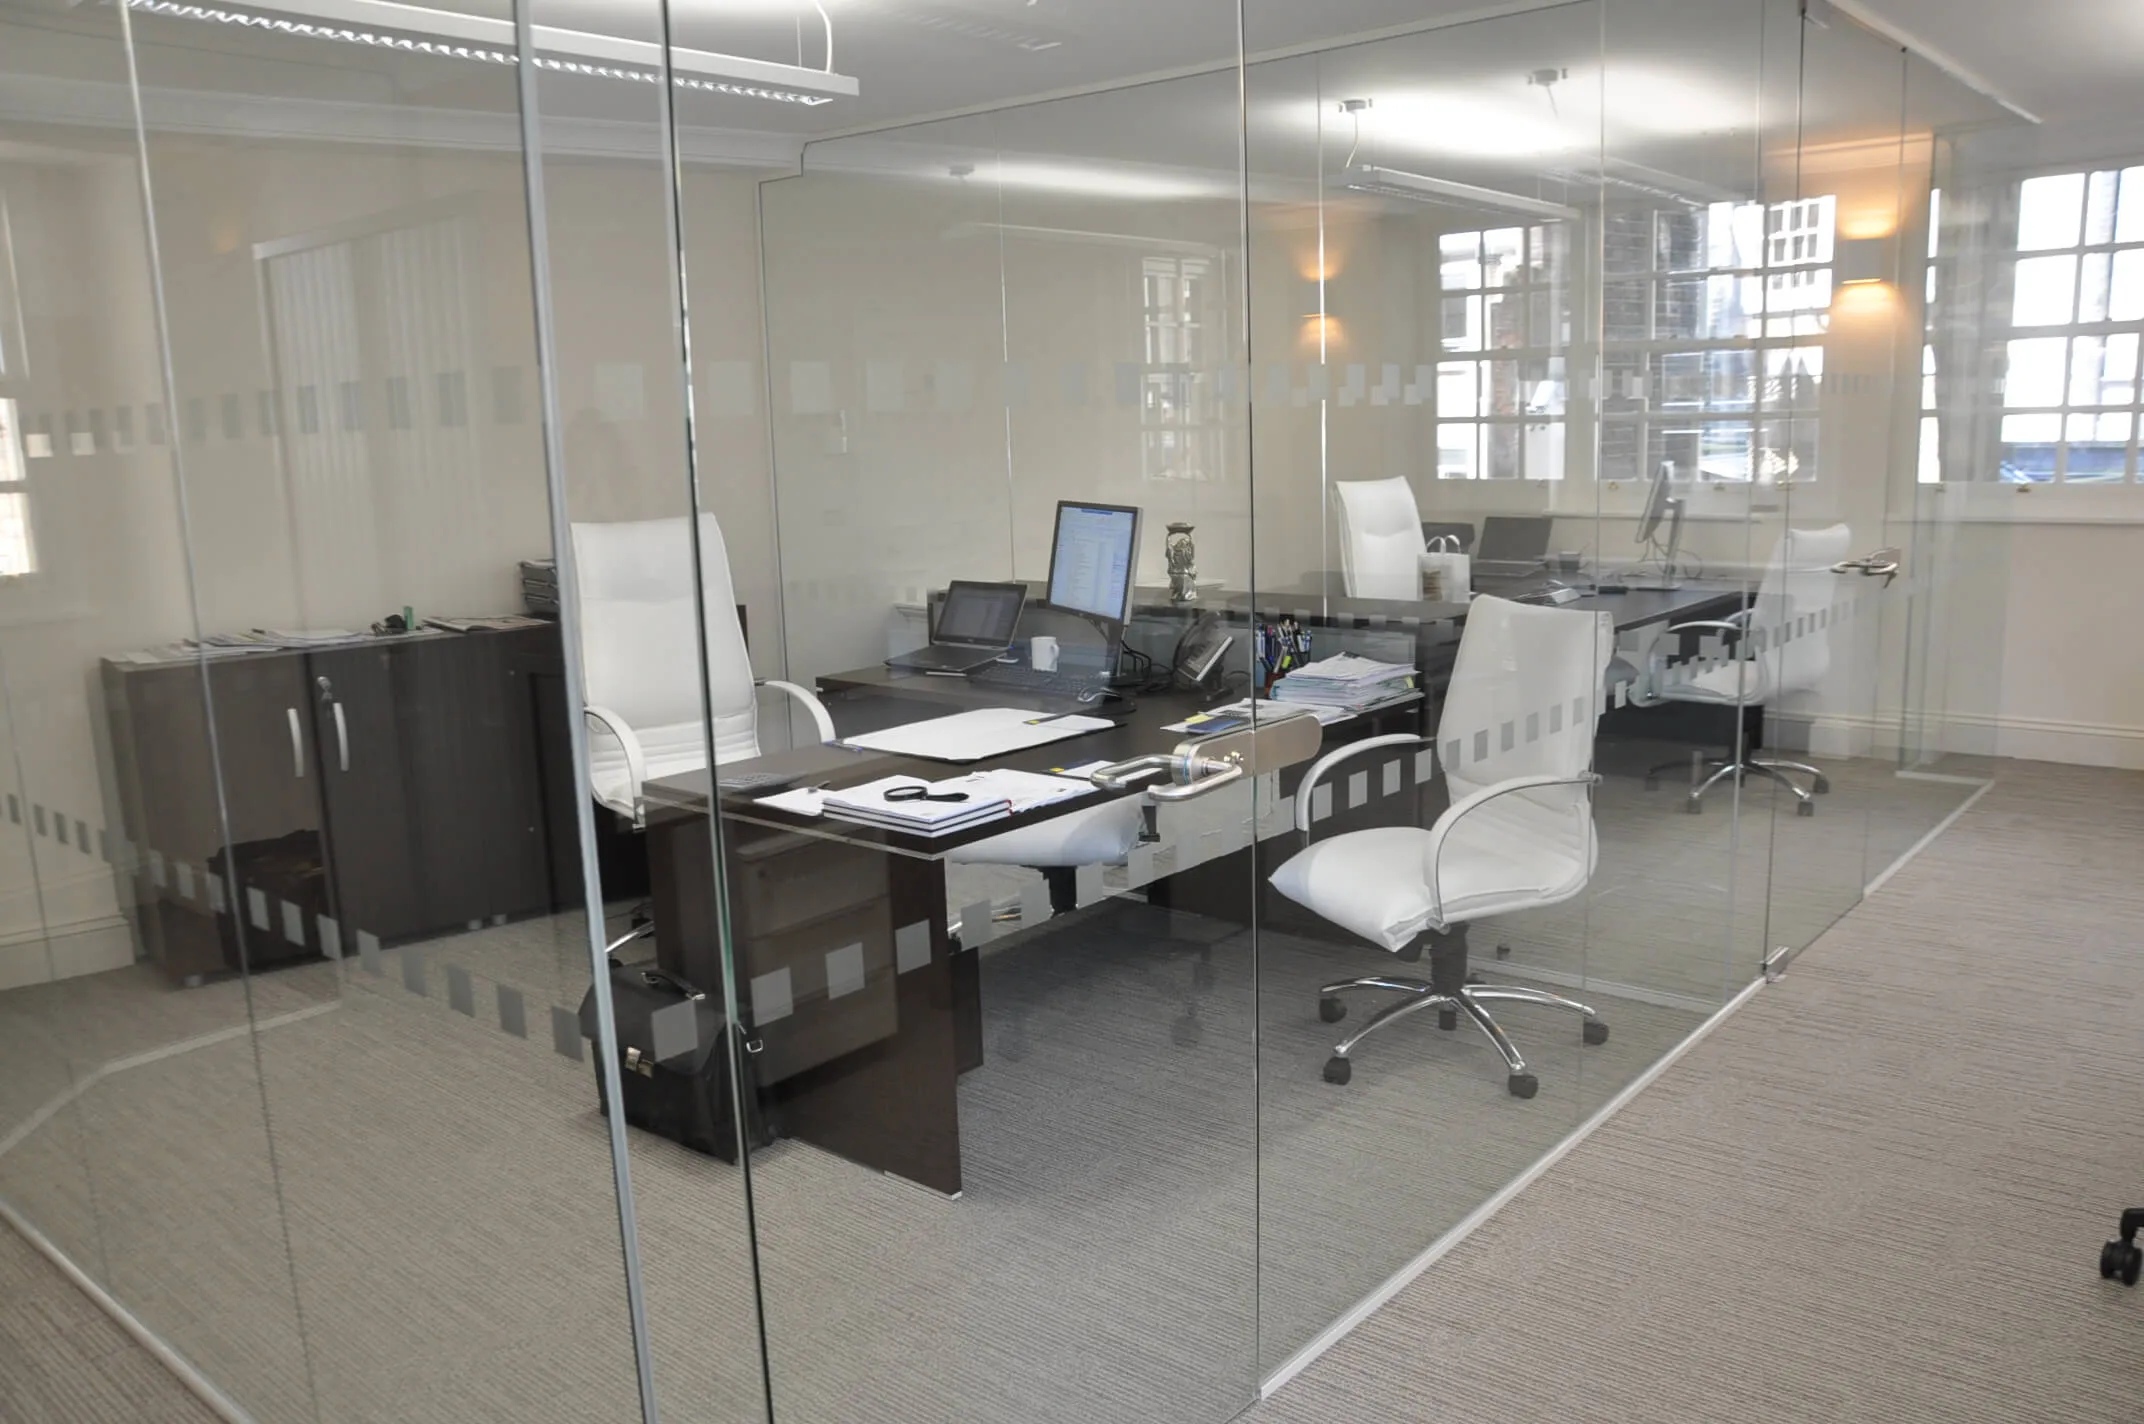 Executive private space with glass partition